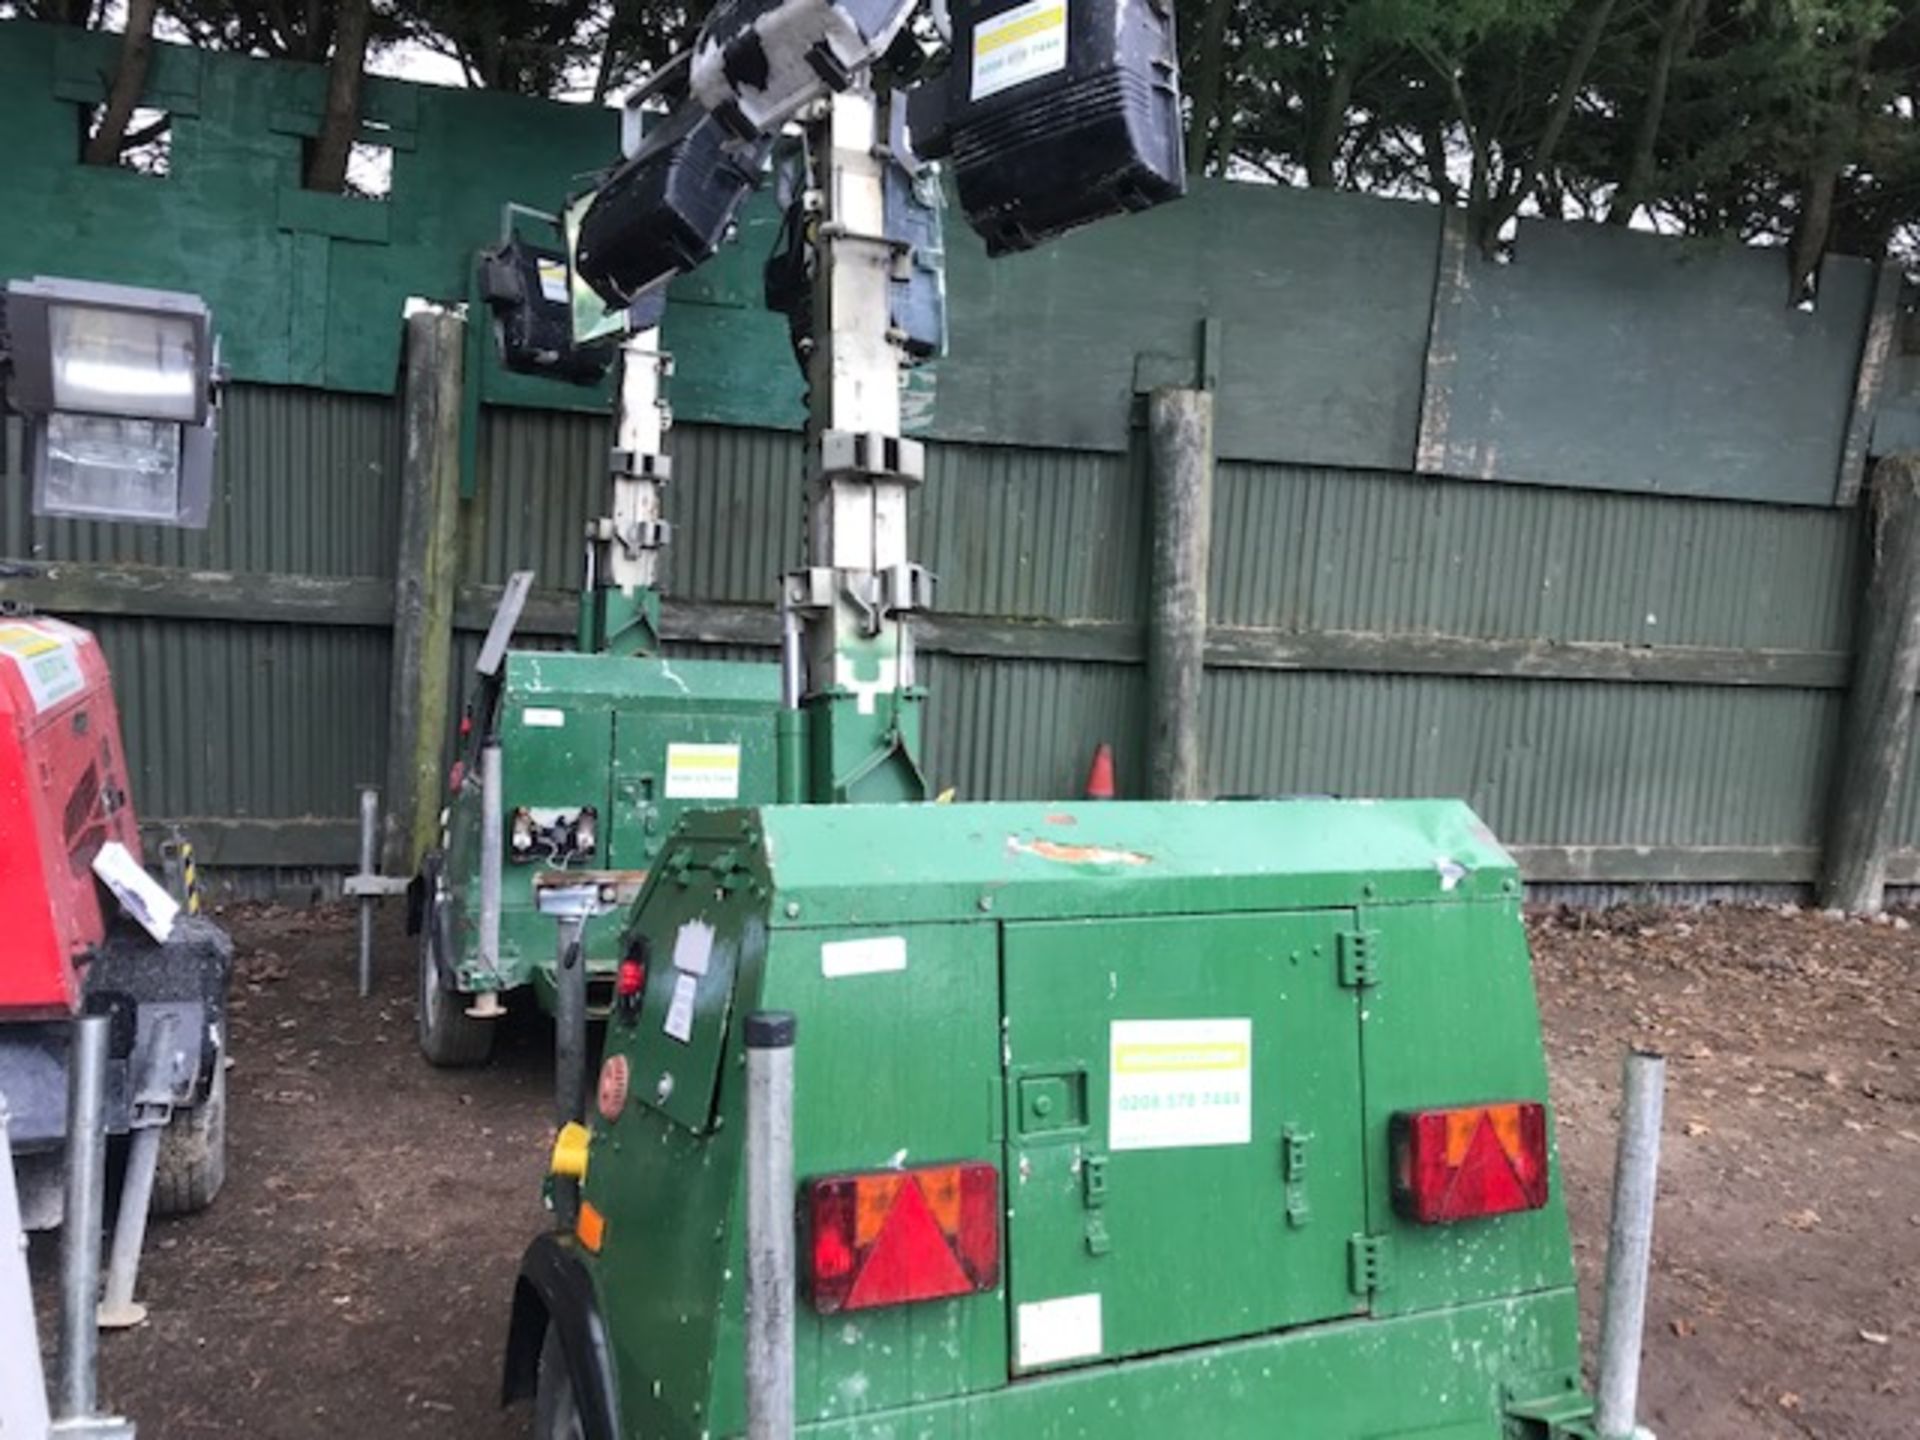 SMC TL90 TOWED LIGTING TOWER, YEAR 2007 PN:7687FC WHEN TESTED WAS SEEN TO RUN AND MAKE LIGHT, AS